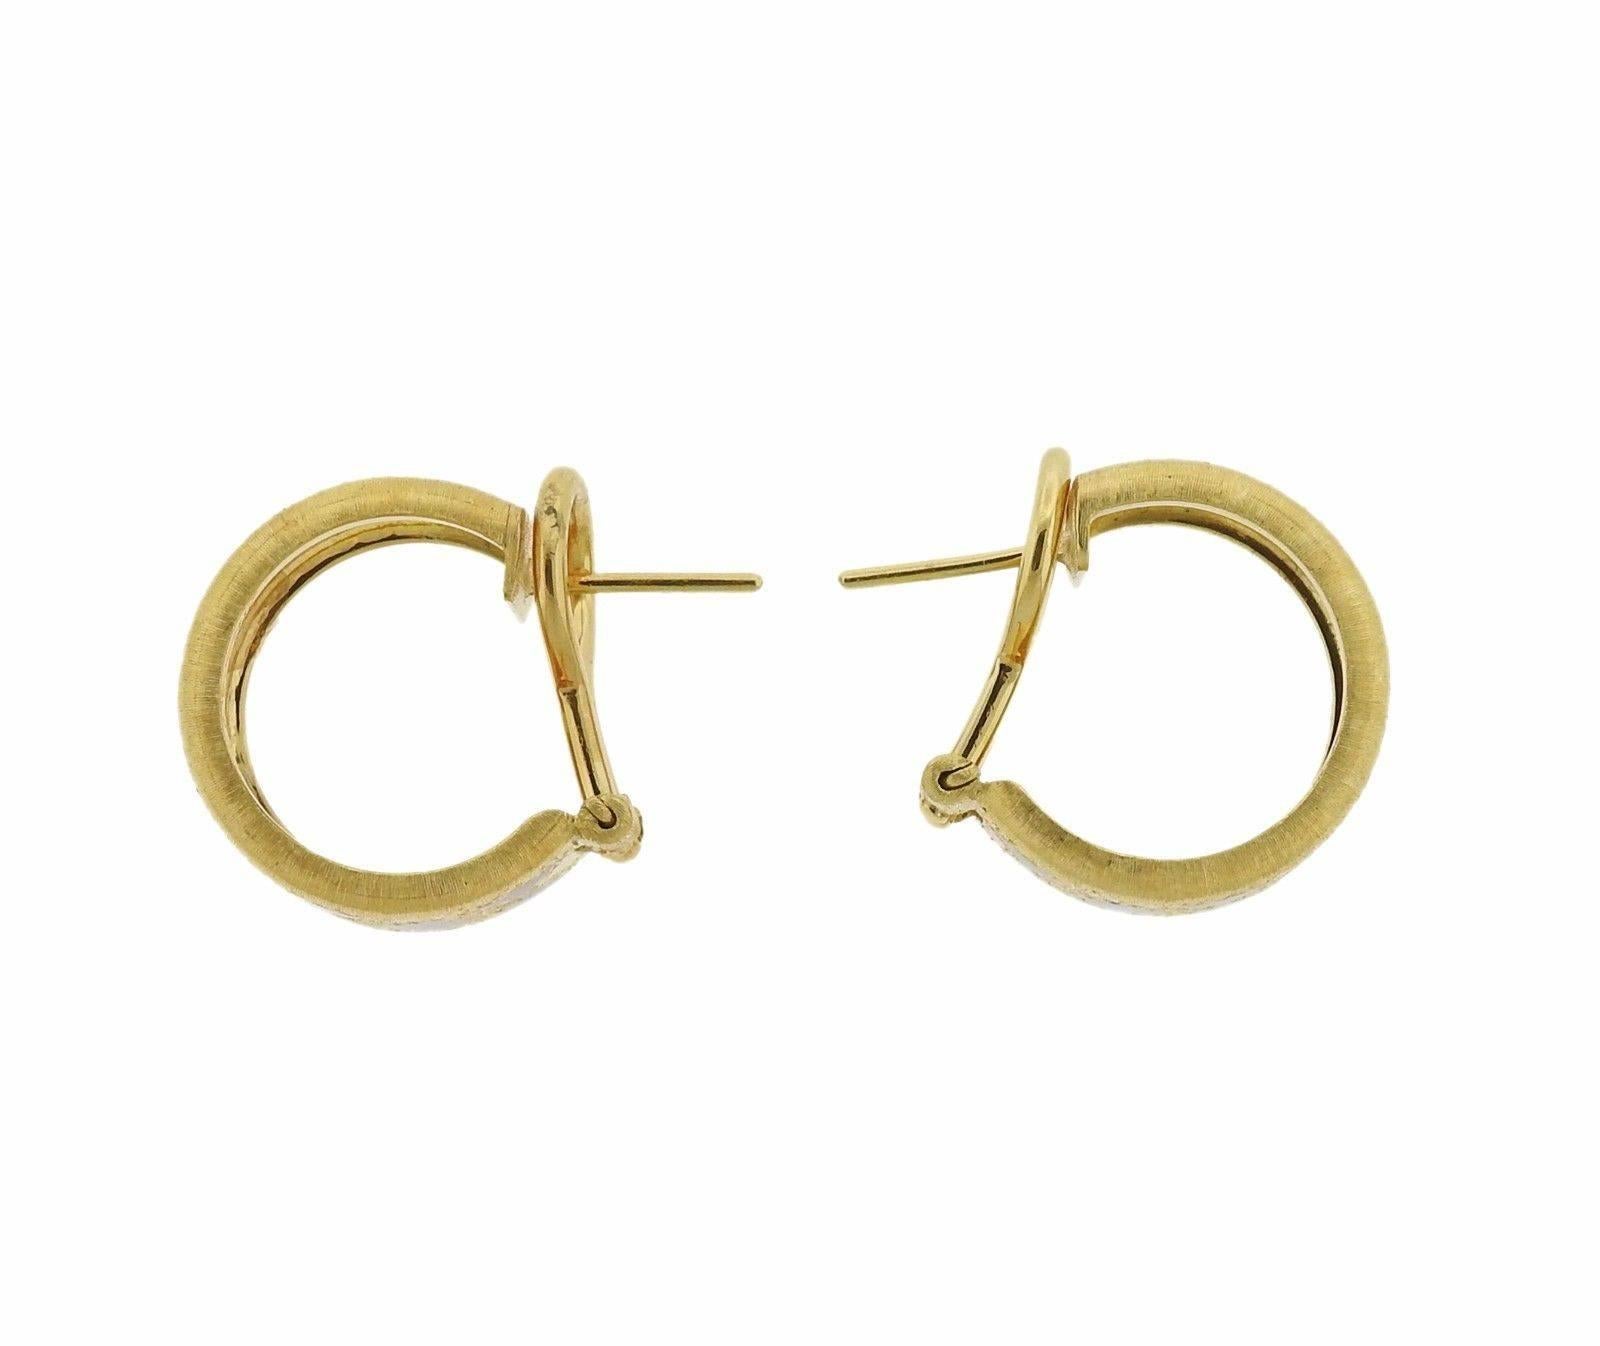 A pair of 18k gold hoop earrings adorned with blue enamel.  The earrings measure 16mm in diameter and weigh 14.8 grams.  Marked: Buccellati 18K Italy.  The retail for this pair is $12,900. Comes with Buccellati paperwork.